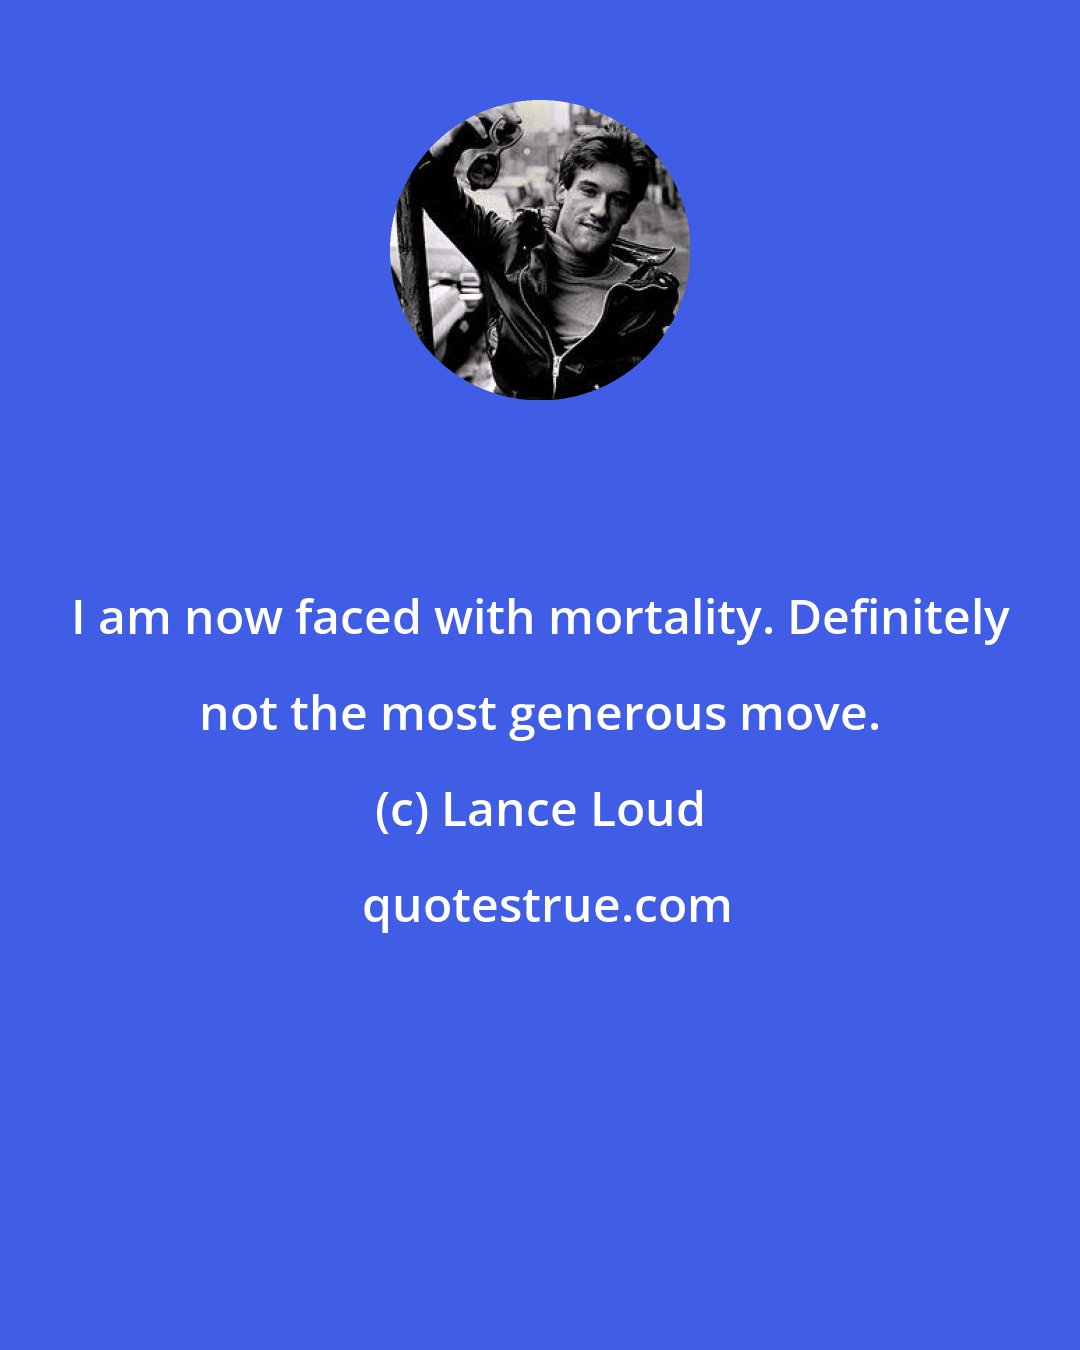 Lance Loud: I am now faced with mortality. Definitely not the most generous move.